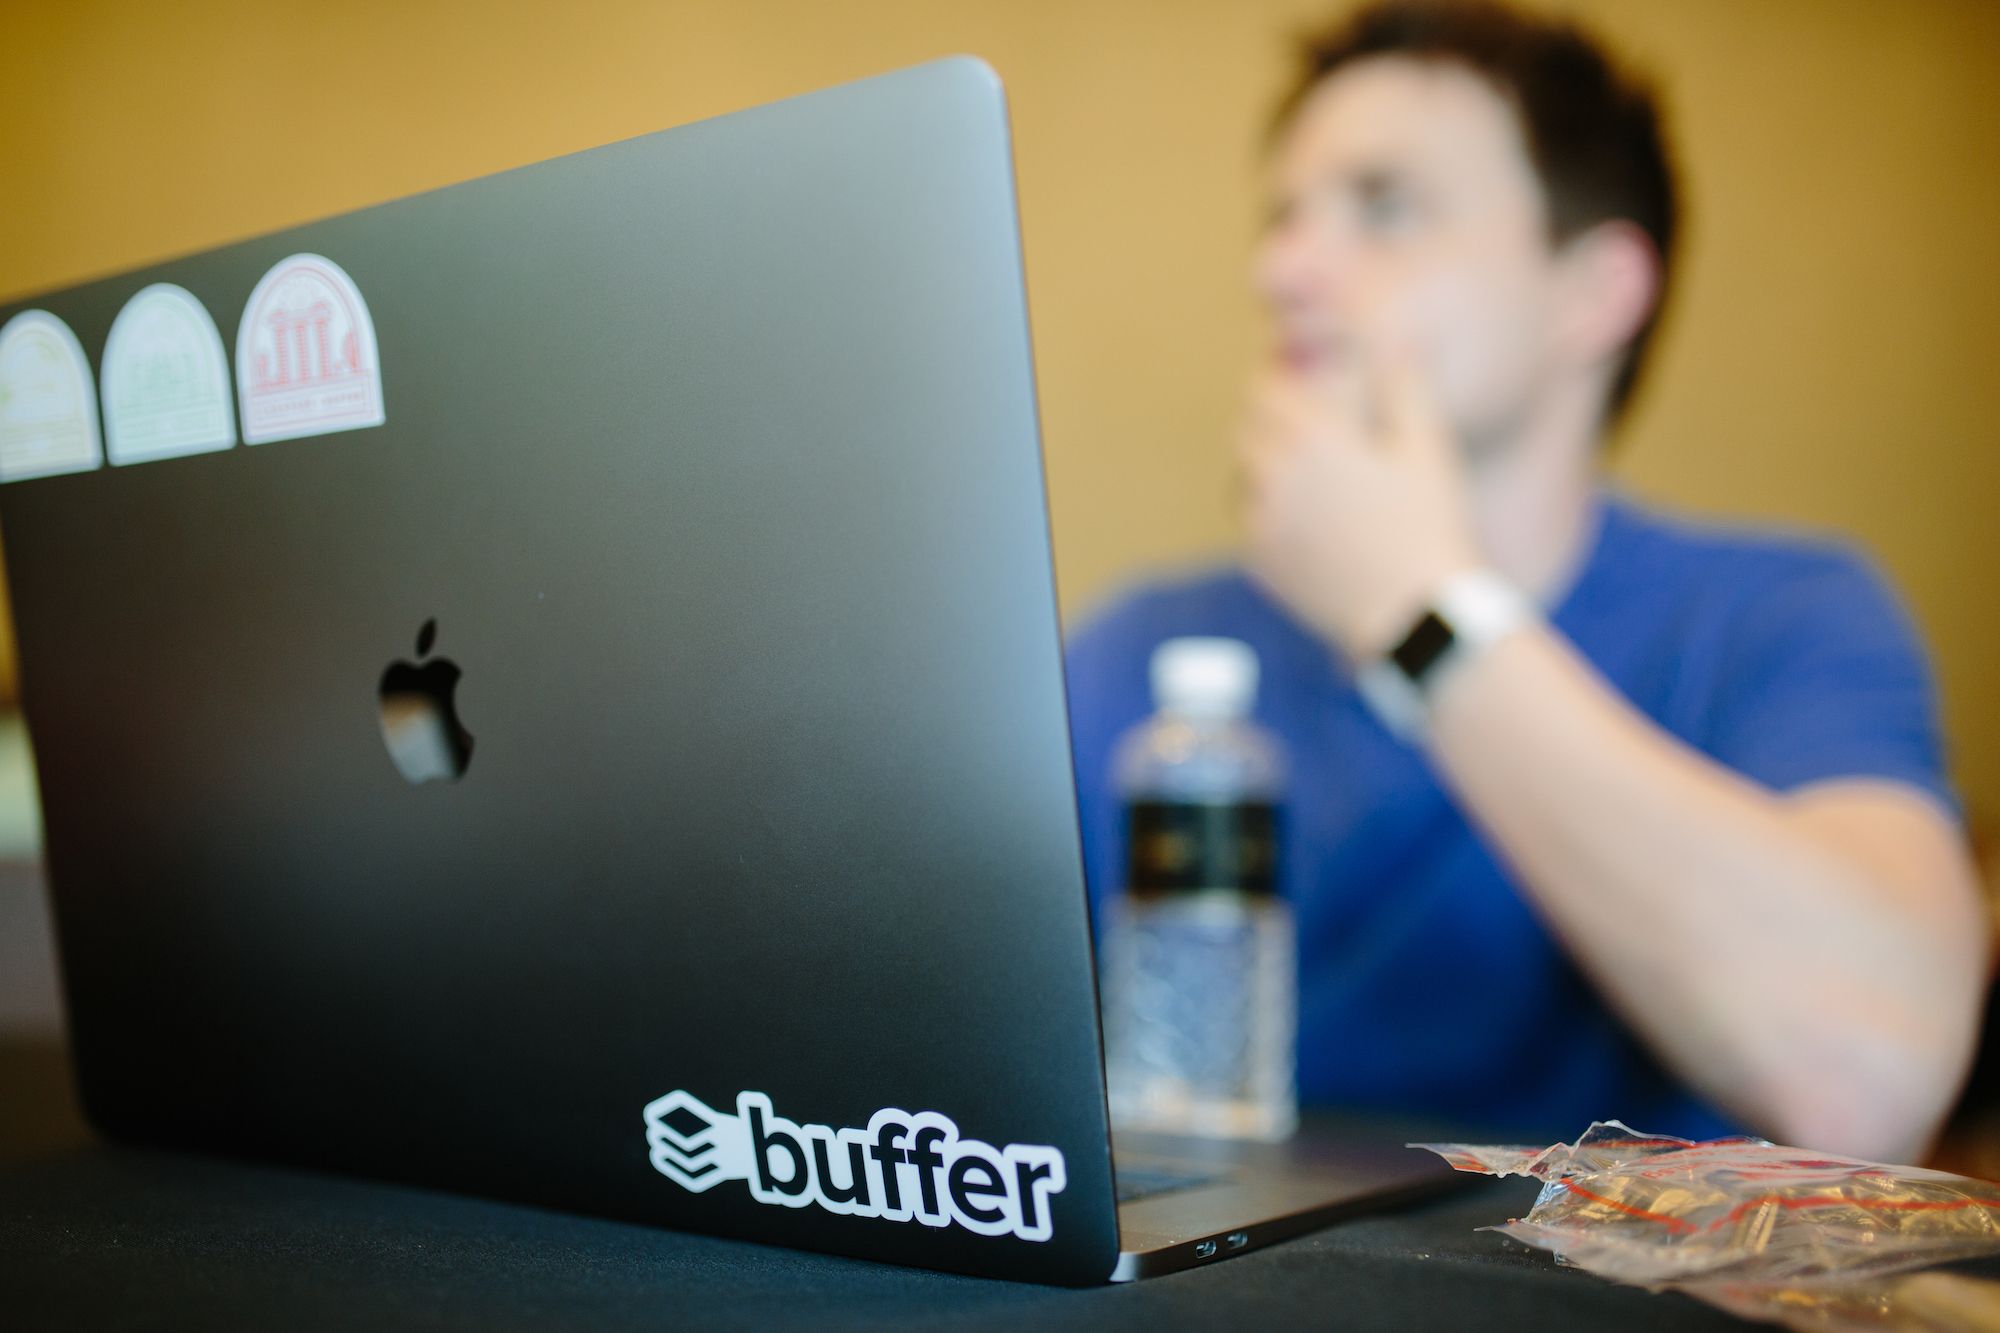 An image of a laptop with a Buffer sticker on it.